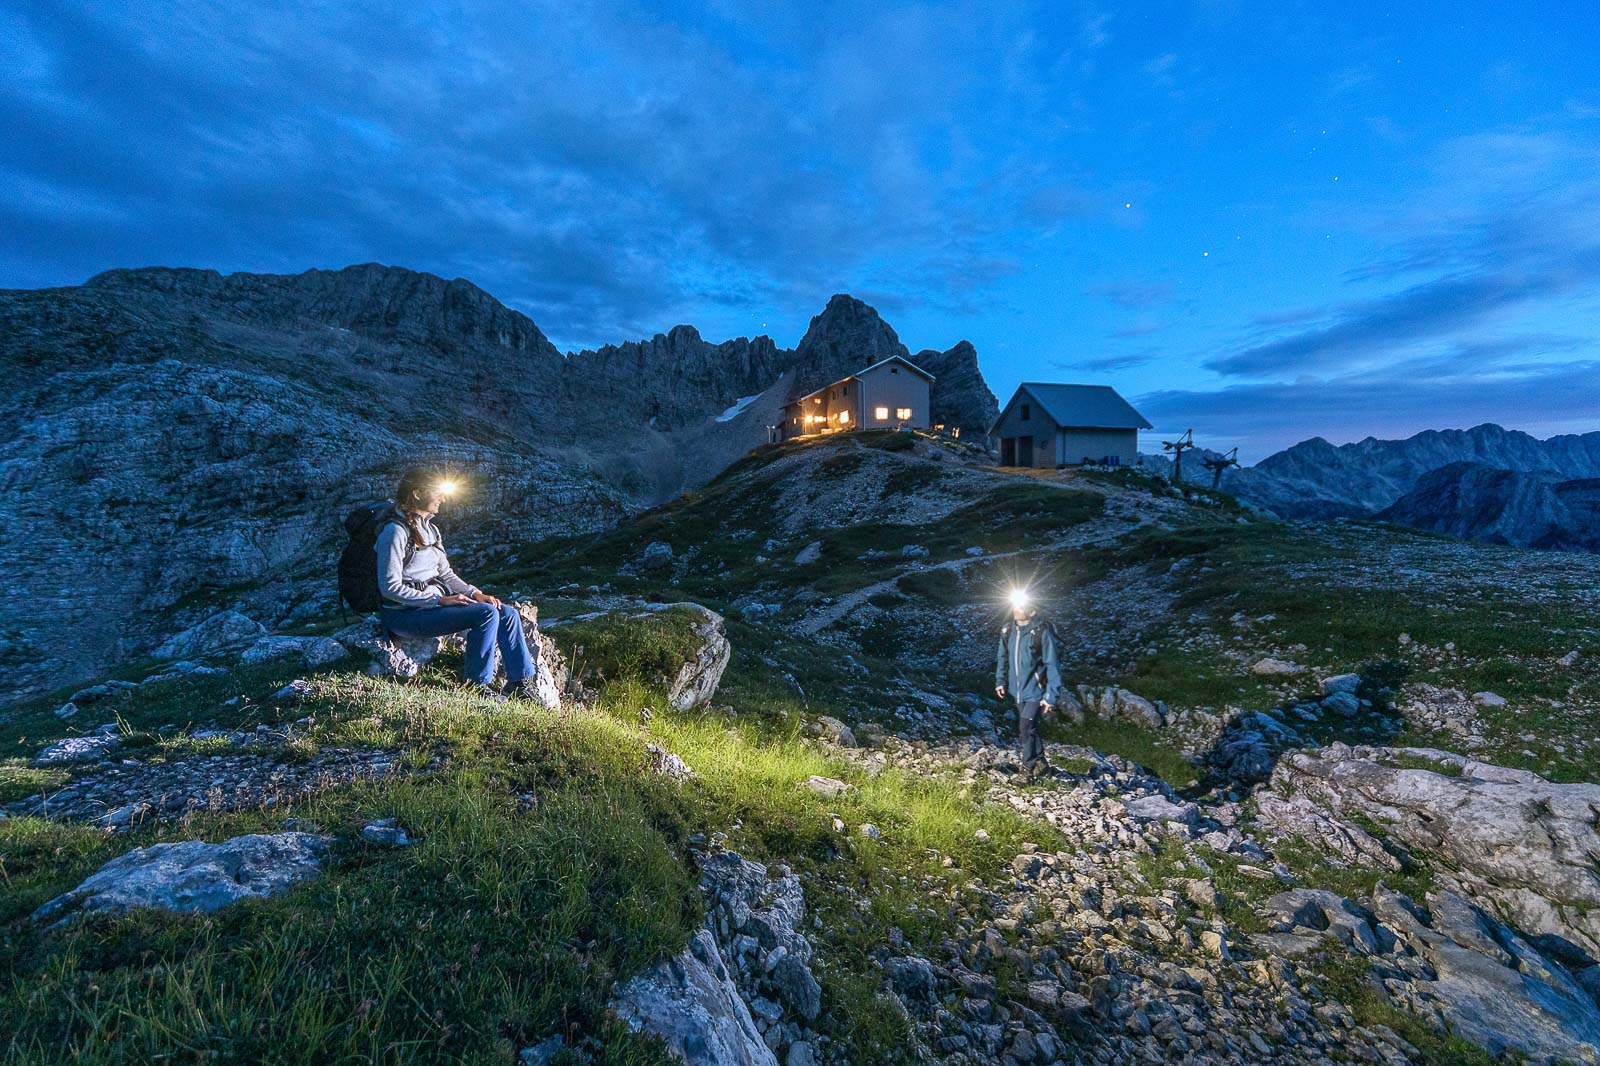 Hikers at Prehodavci mountain hut in the Julian Alps at dusk